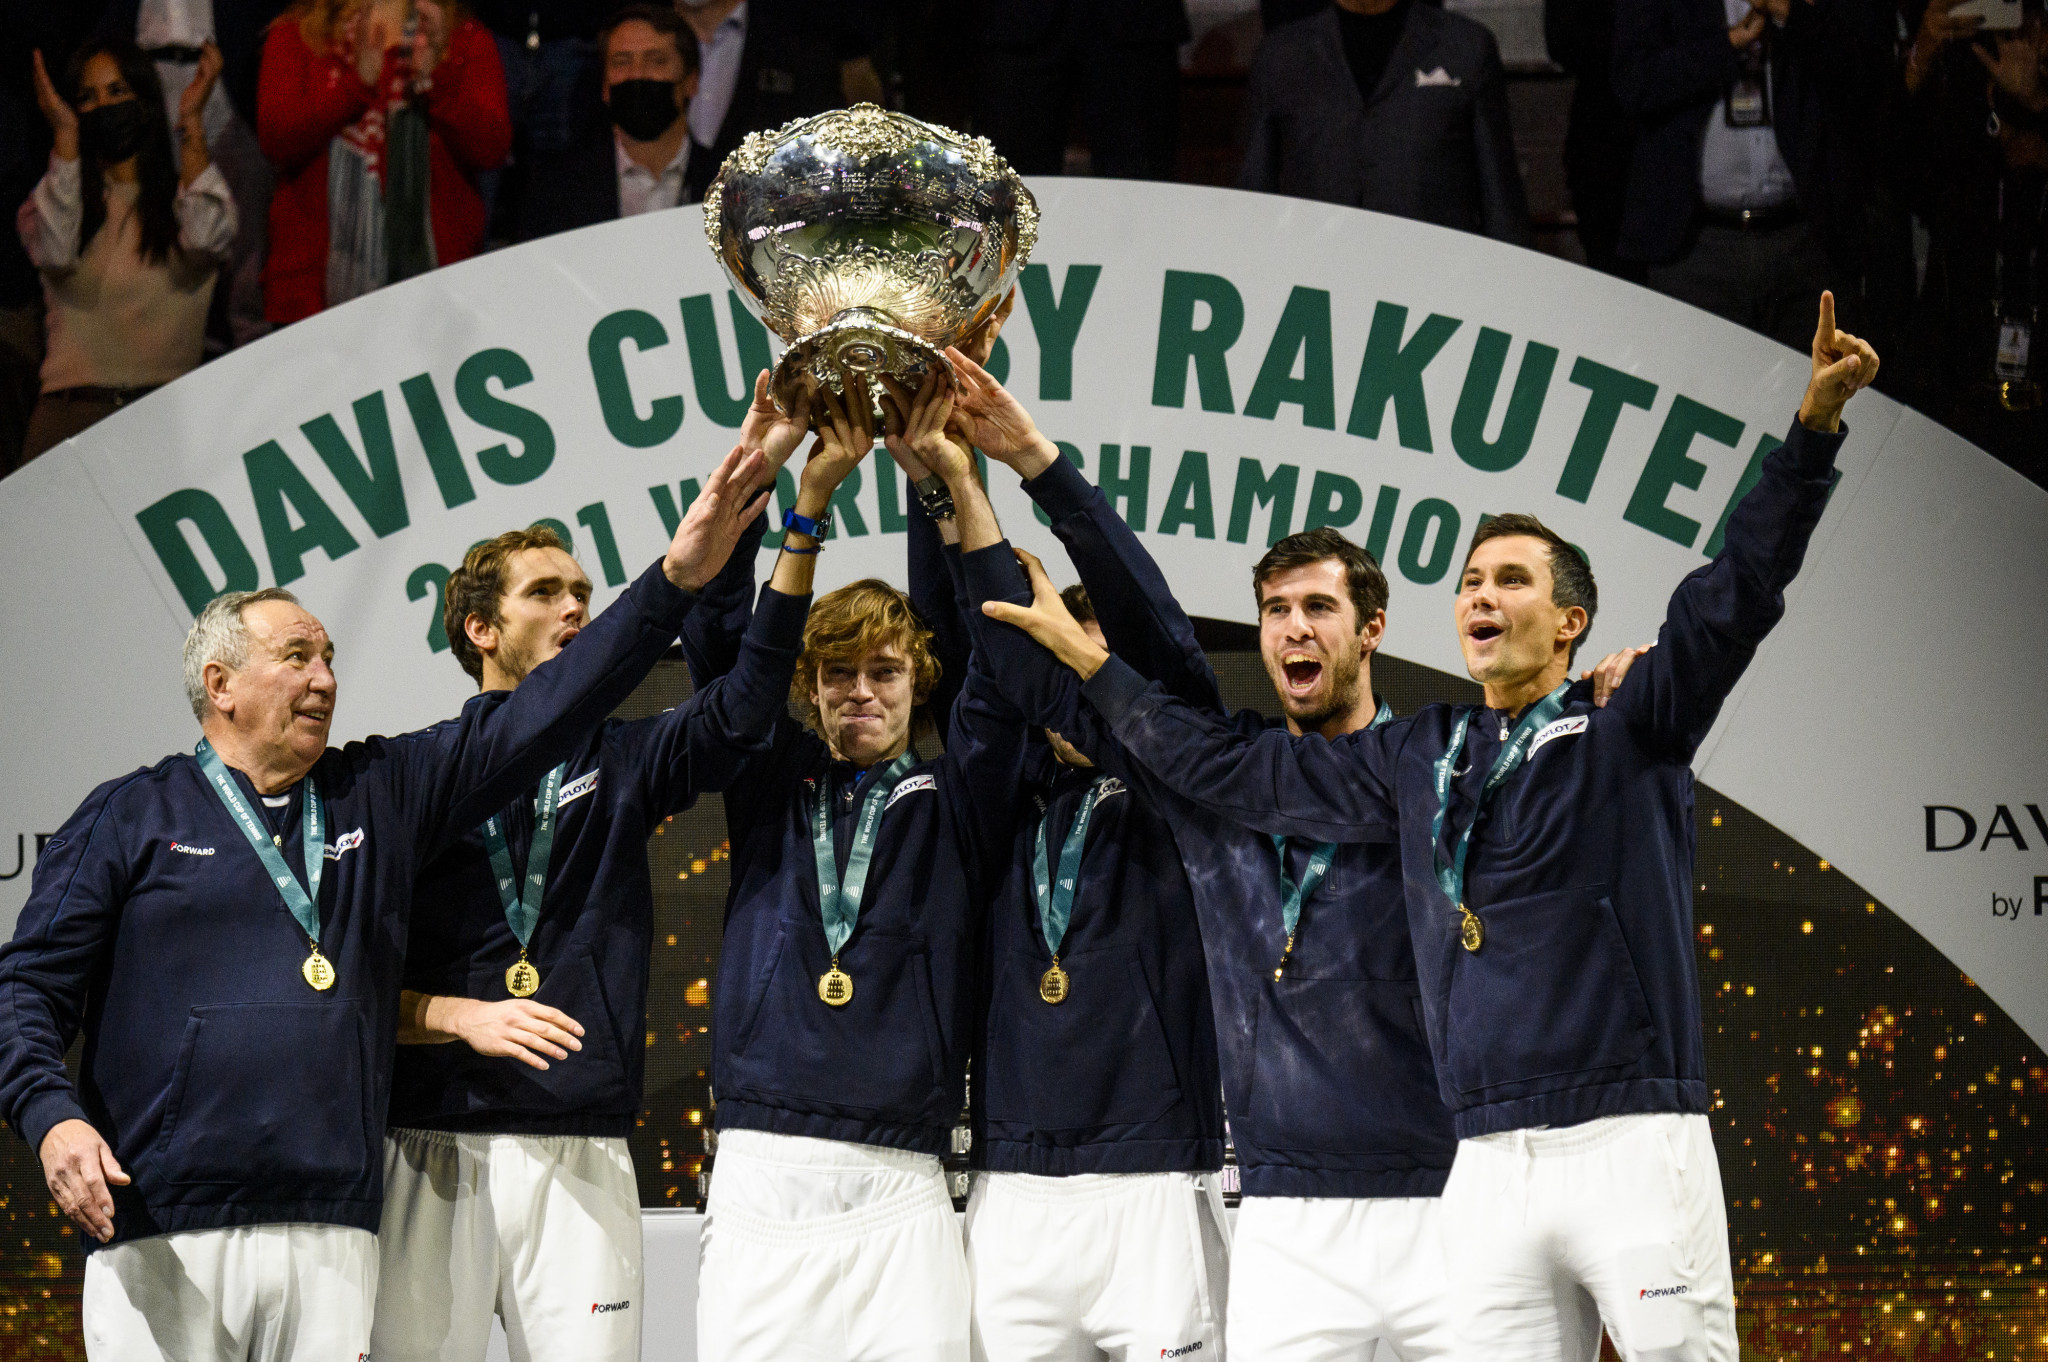 The Russian Tennis Federation won the Davis Cup last weekend ©Getty Images